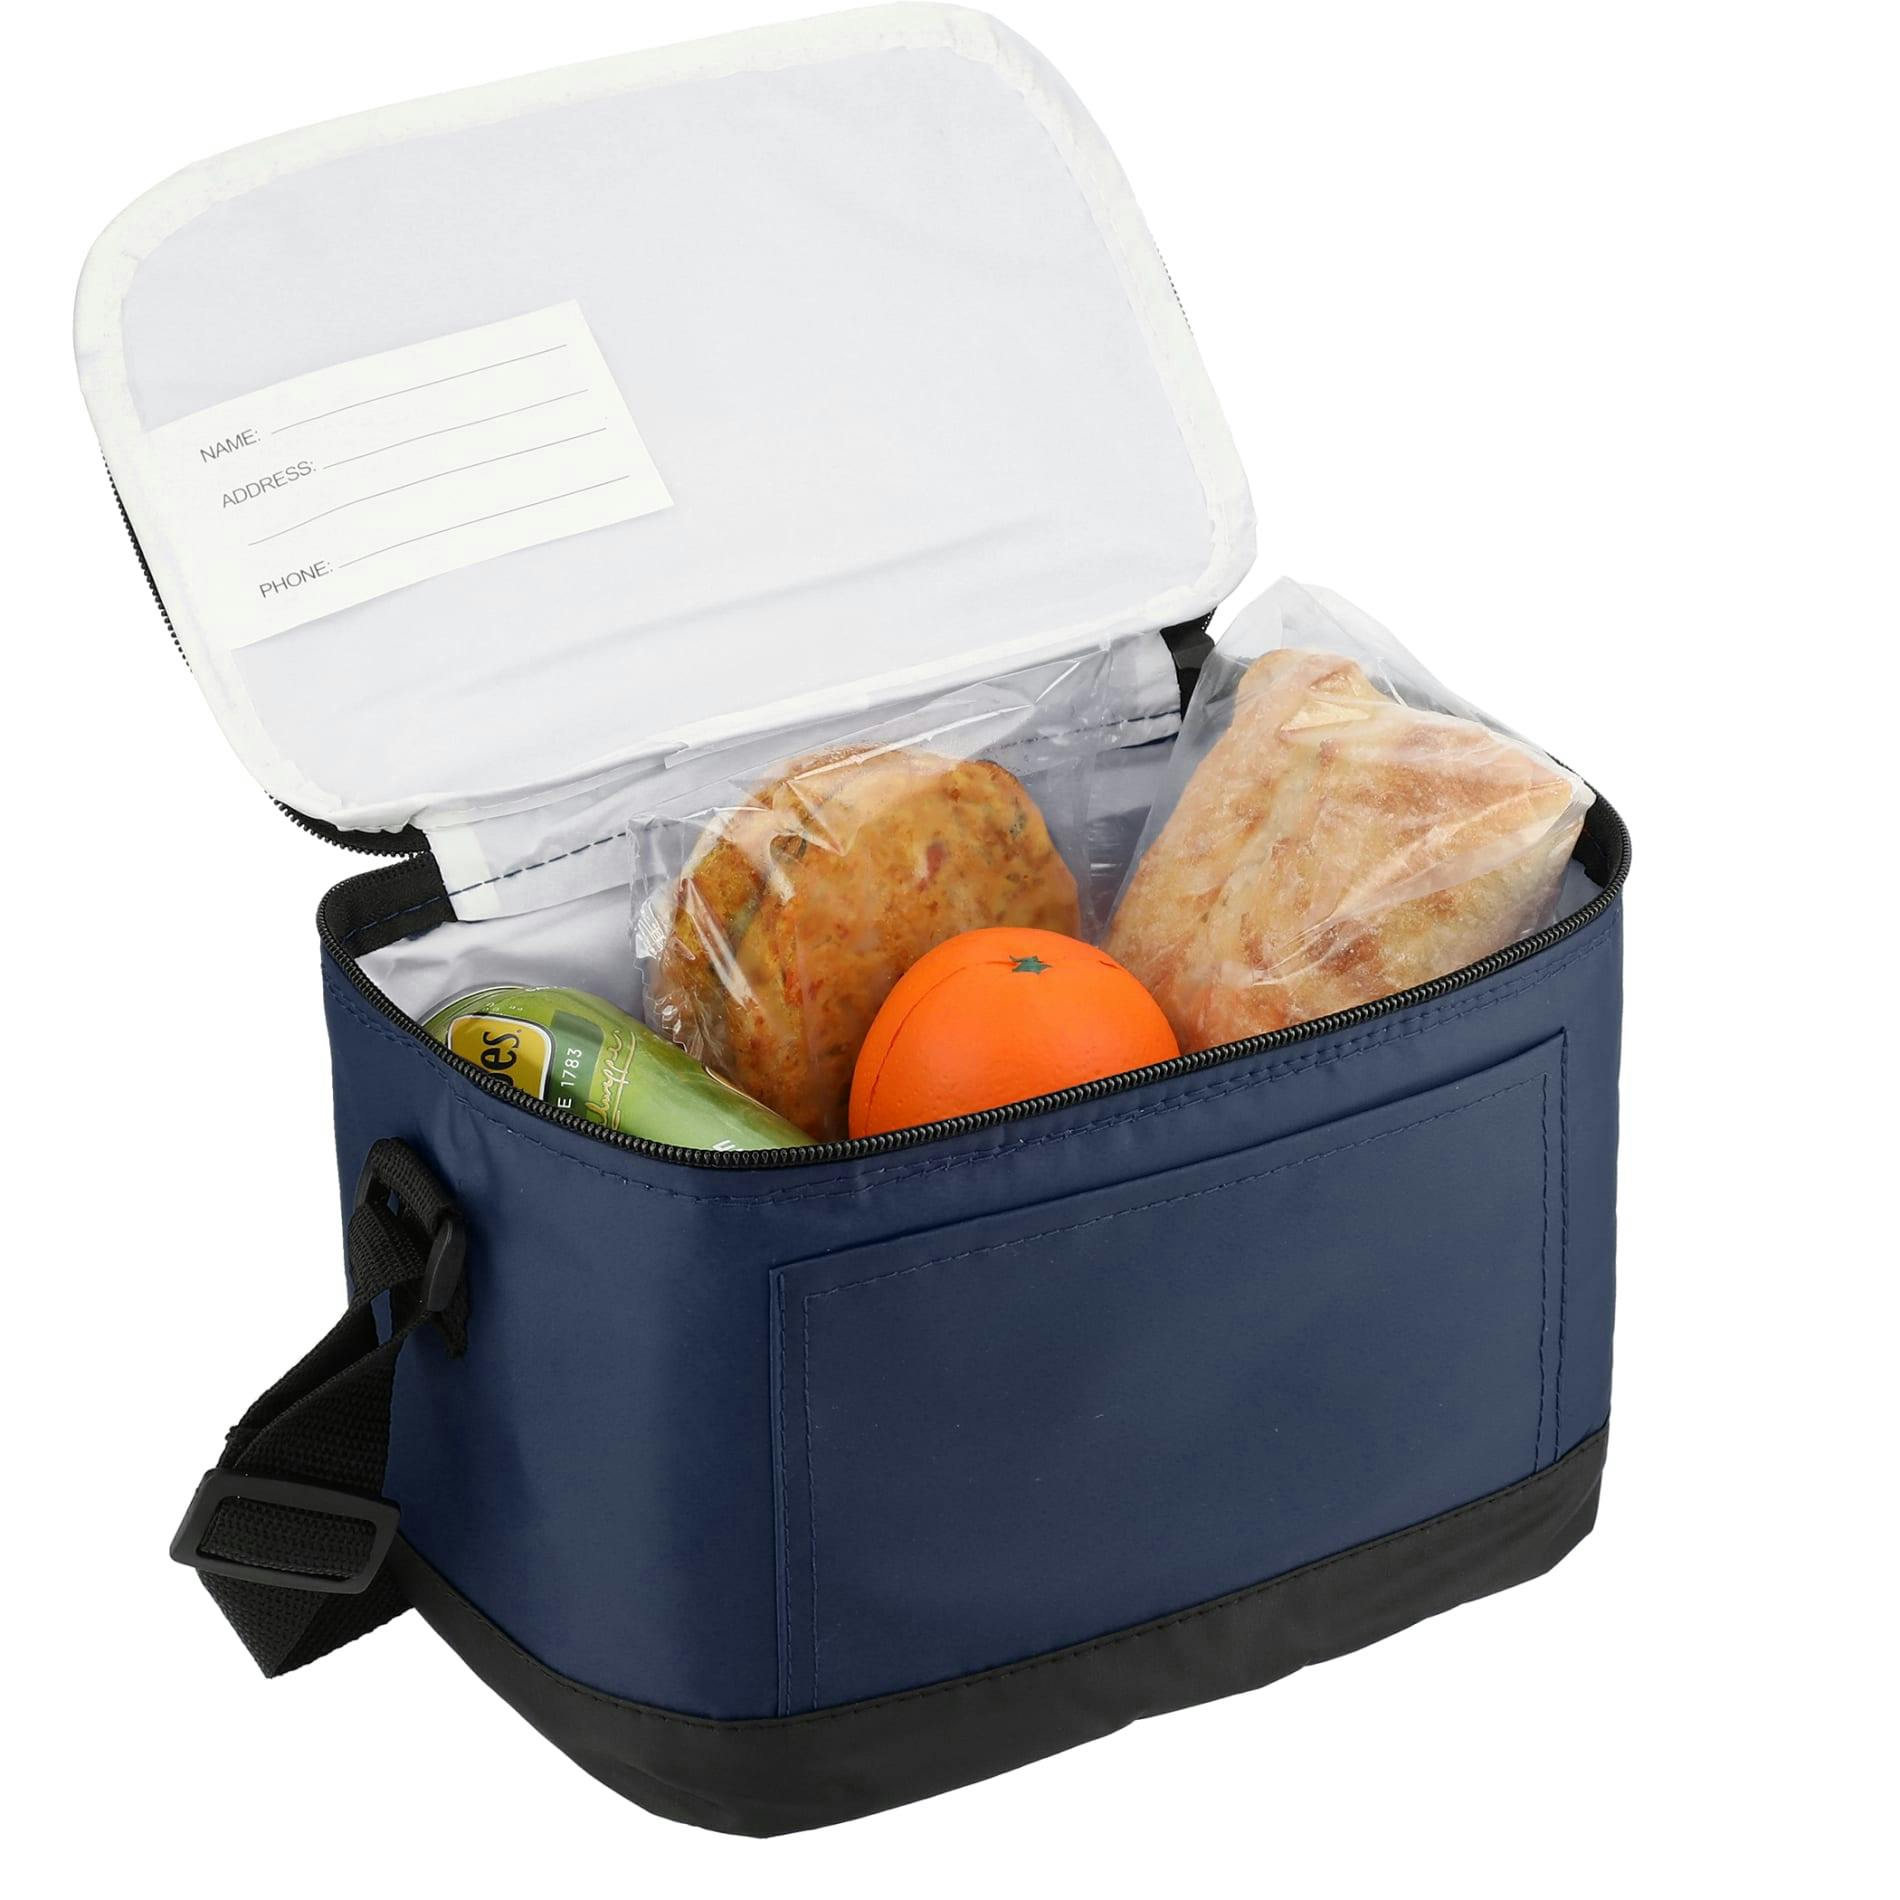 Classic 6-Can Lunch Cooler - additional Image 2